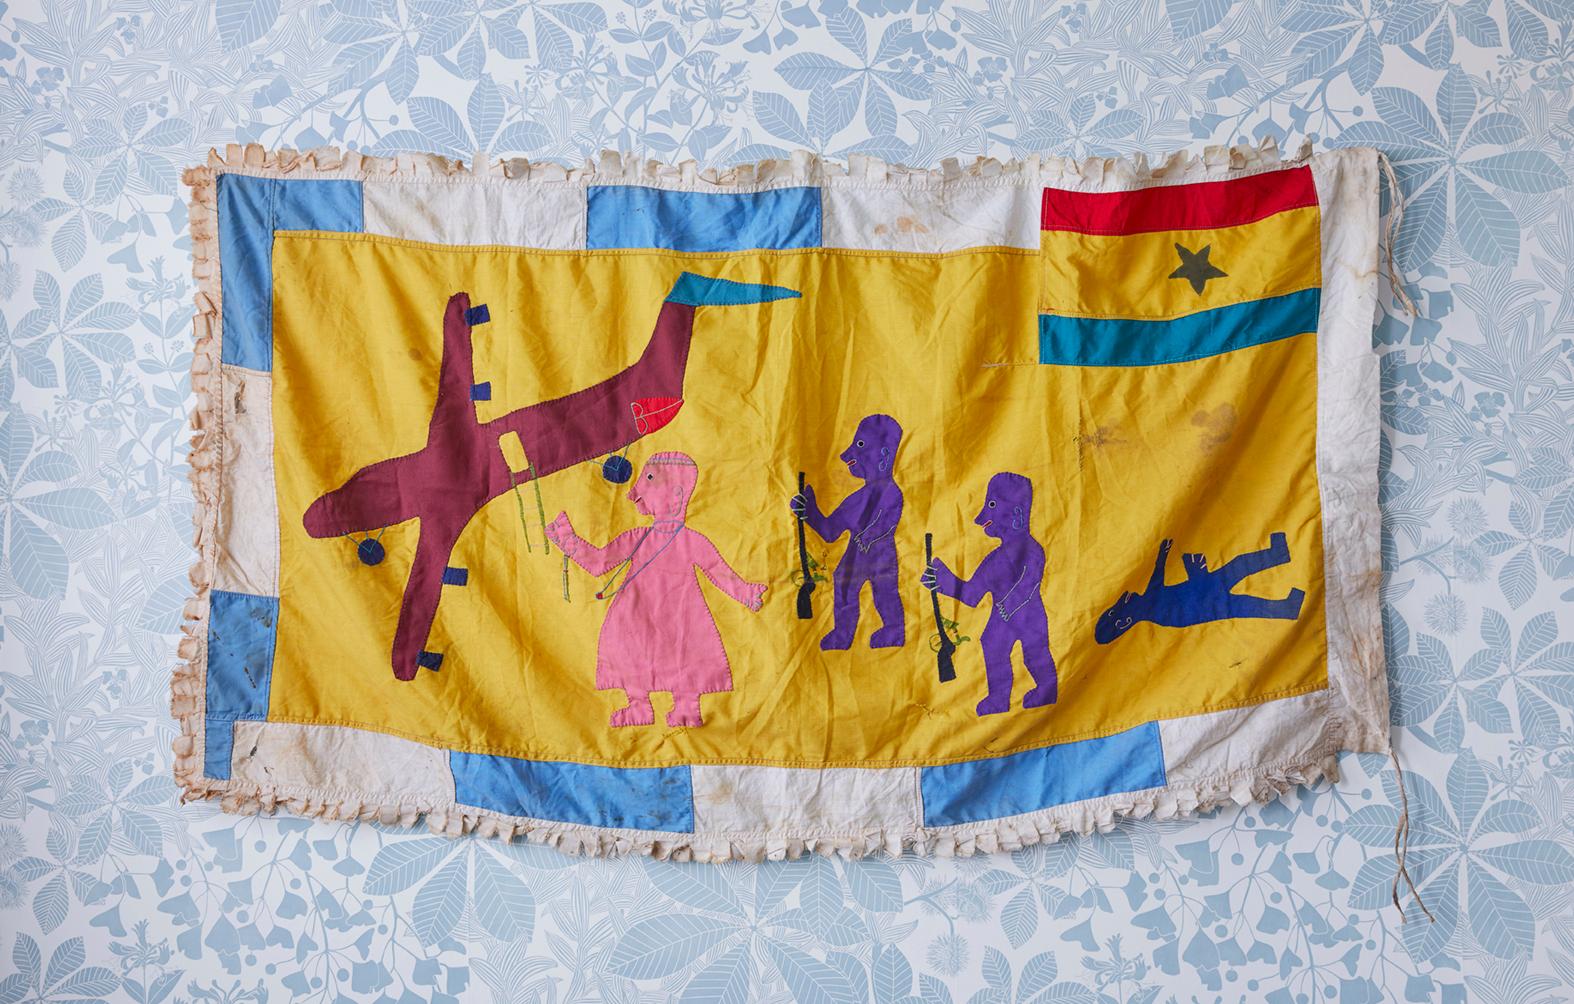 Ghana, 1980's

Asafo flag in cotton applique patterns. Fante People.

Asafo Flags are created by the Fante people of Ghana. The flags are visual representations of military organisations in Fante communities known as “Asafo”. The communities each